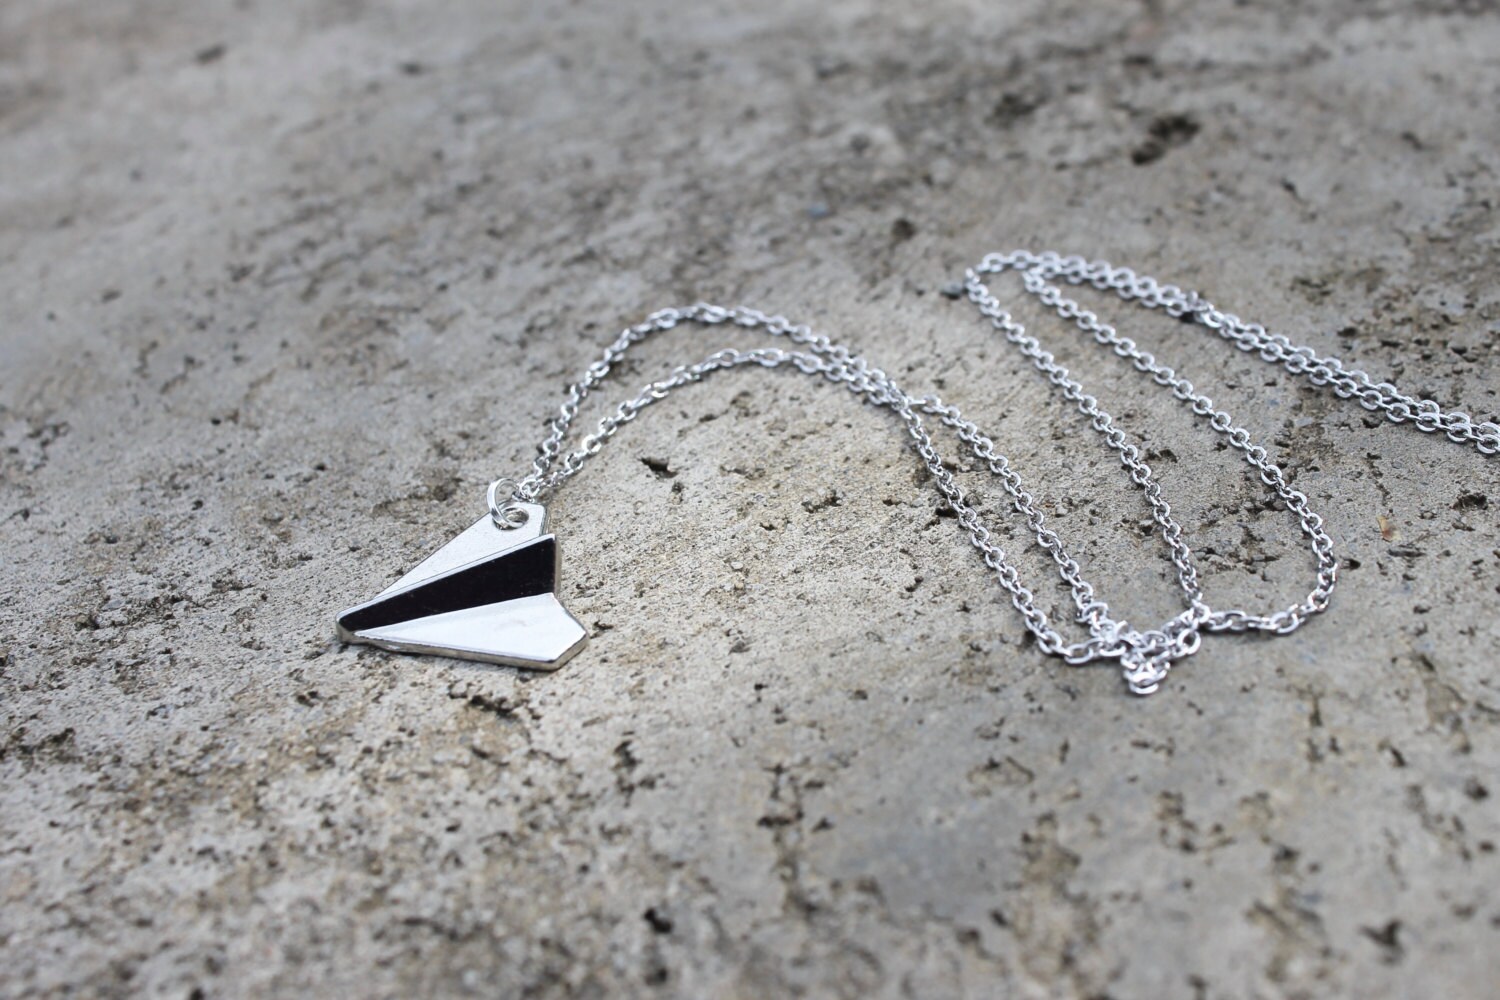 ONE DIRECTION Harry Styles SILVER PAPER AIRPLANE Necklace Pendant Plane USA